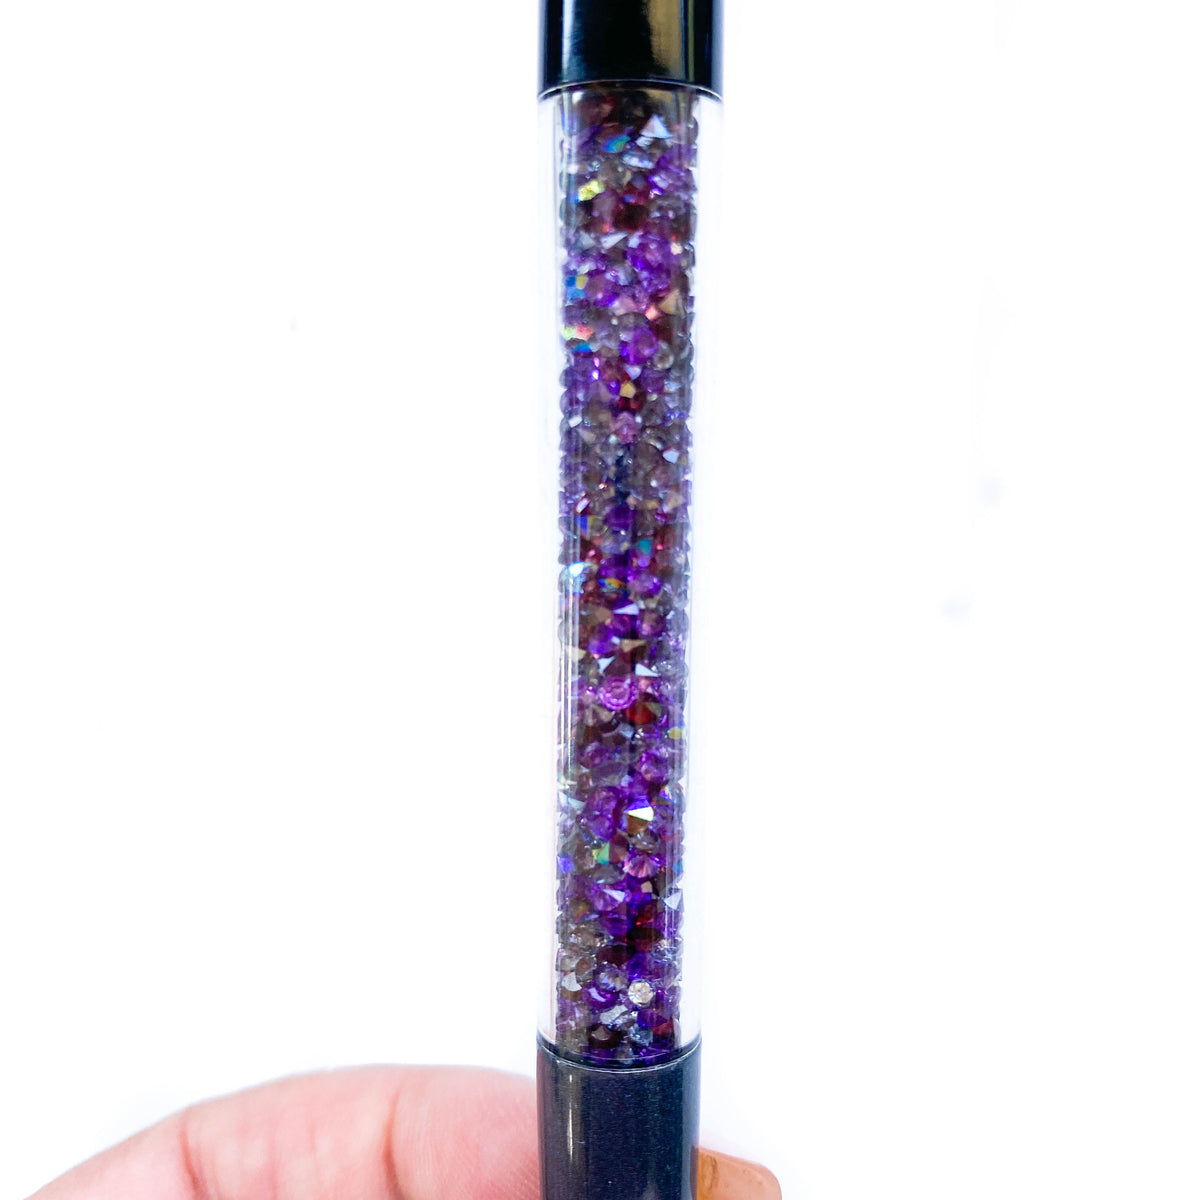 Scorpio Imperfect Crystal VBPen | limited pen